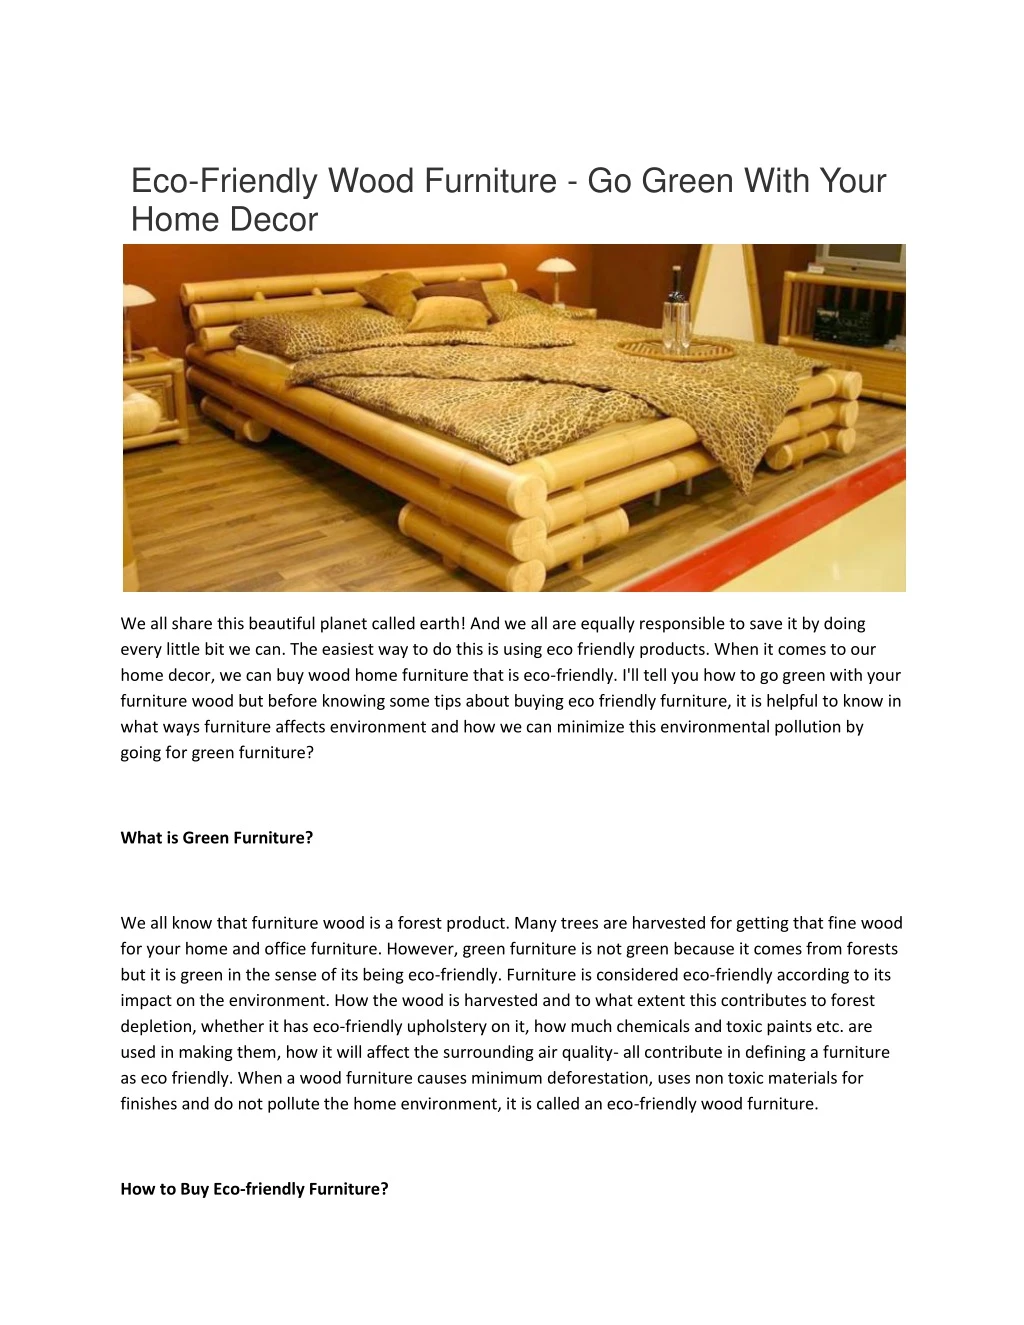 eco friendly wood furniture go green with your